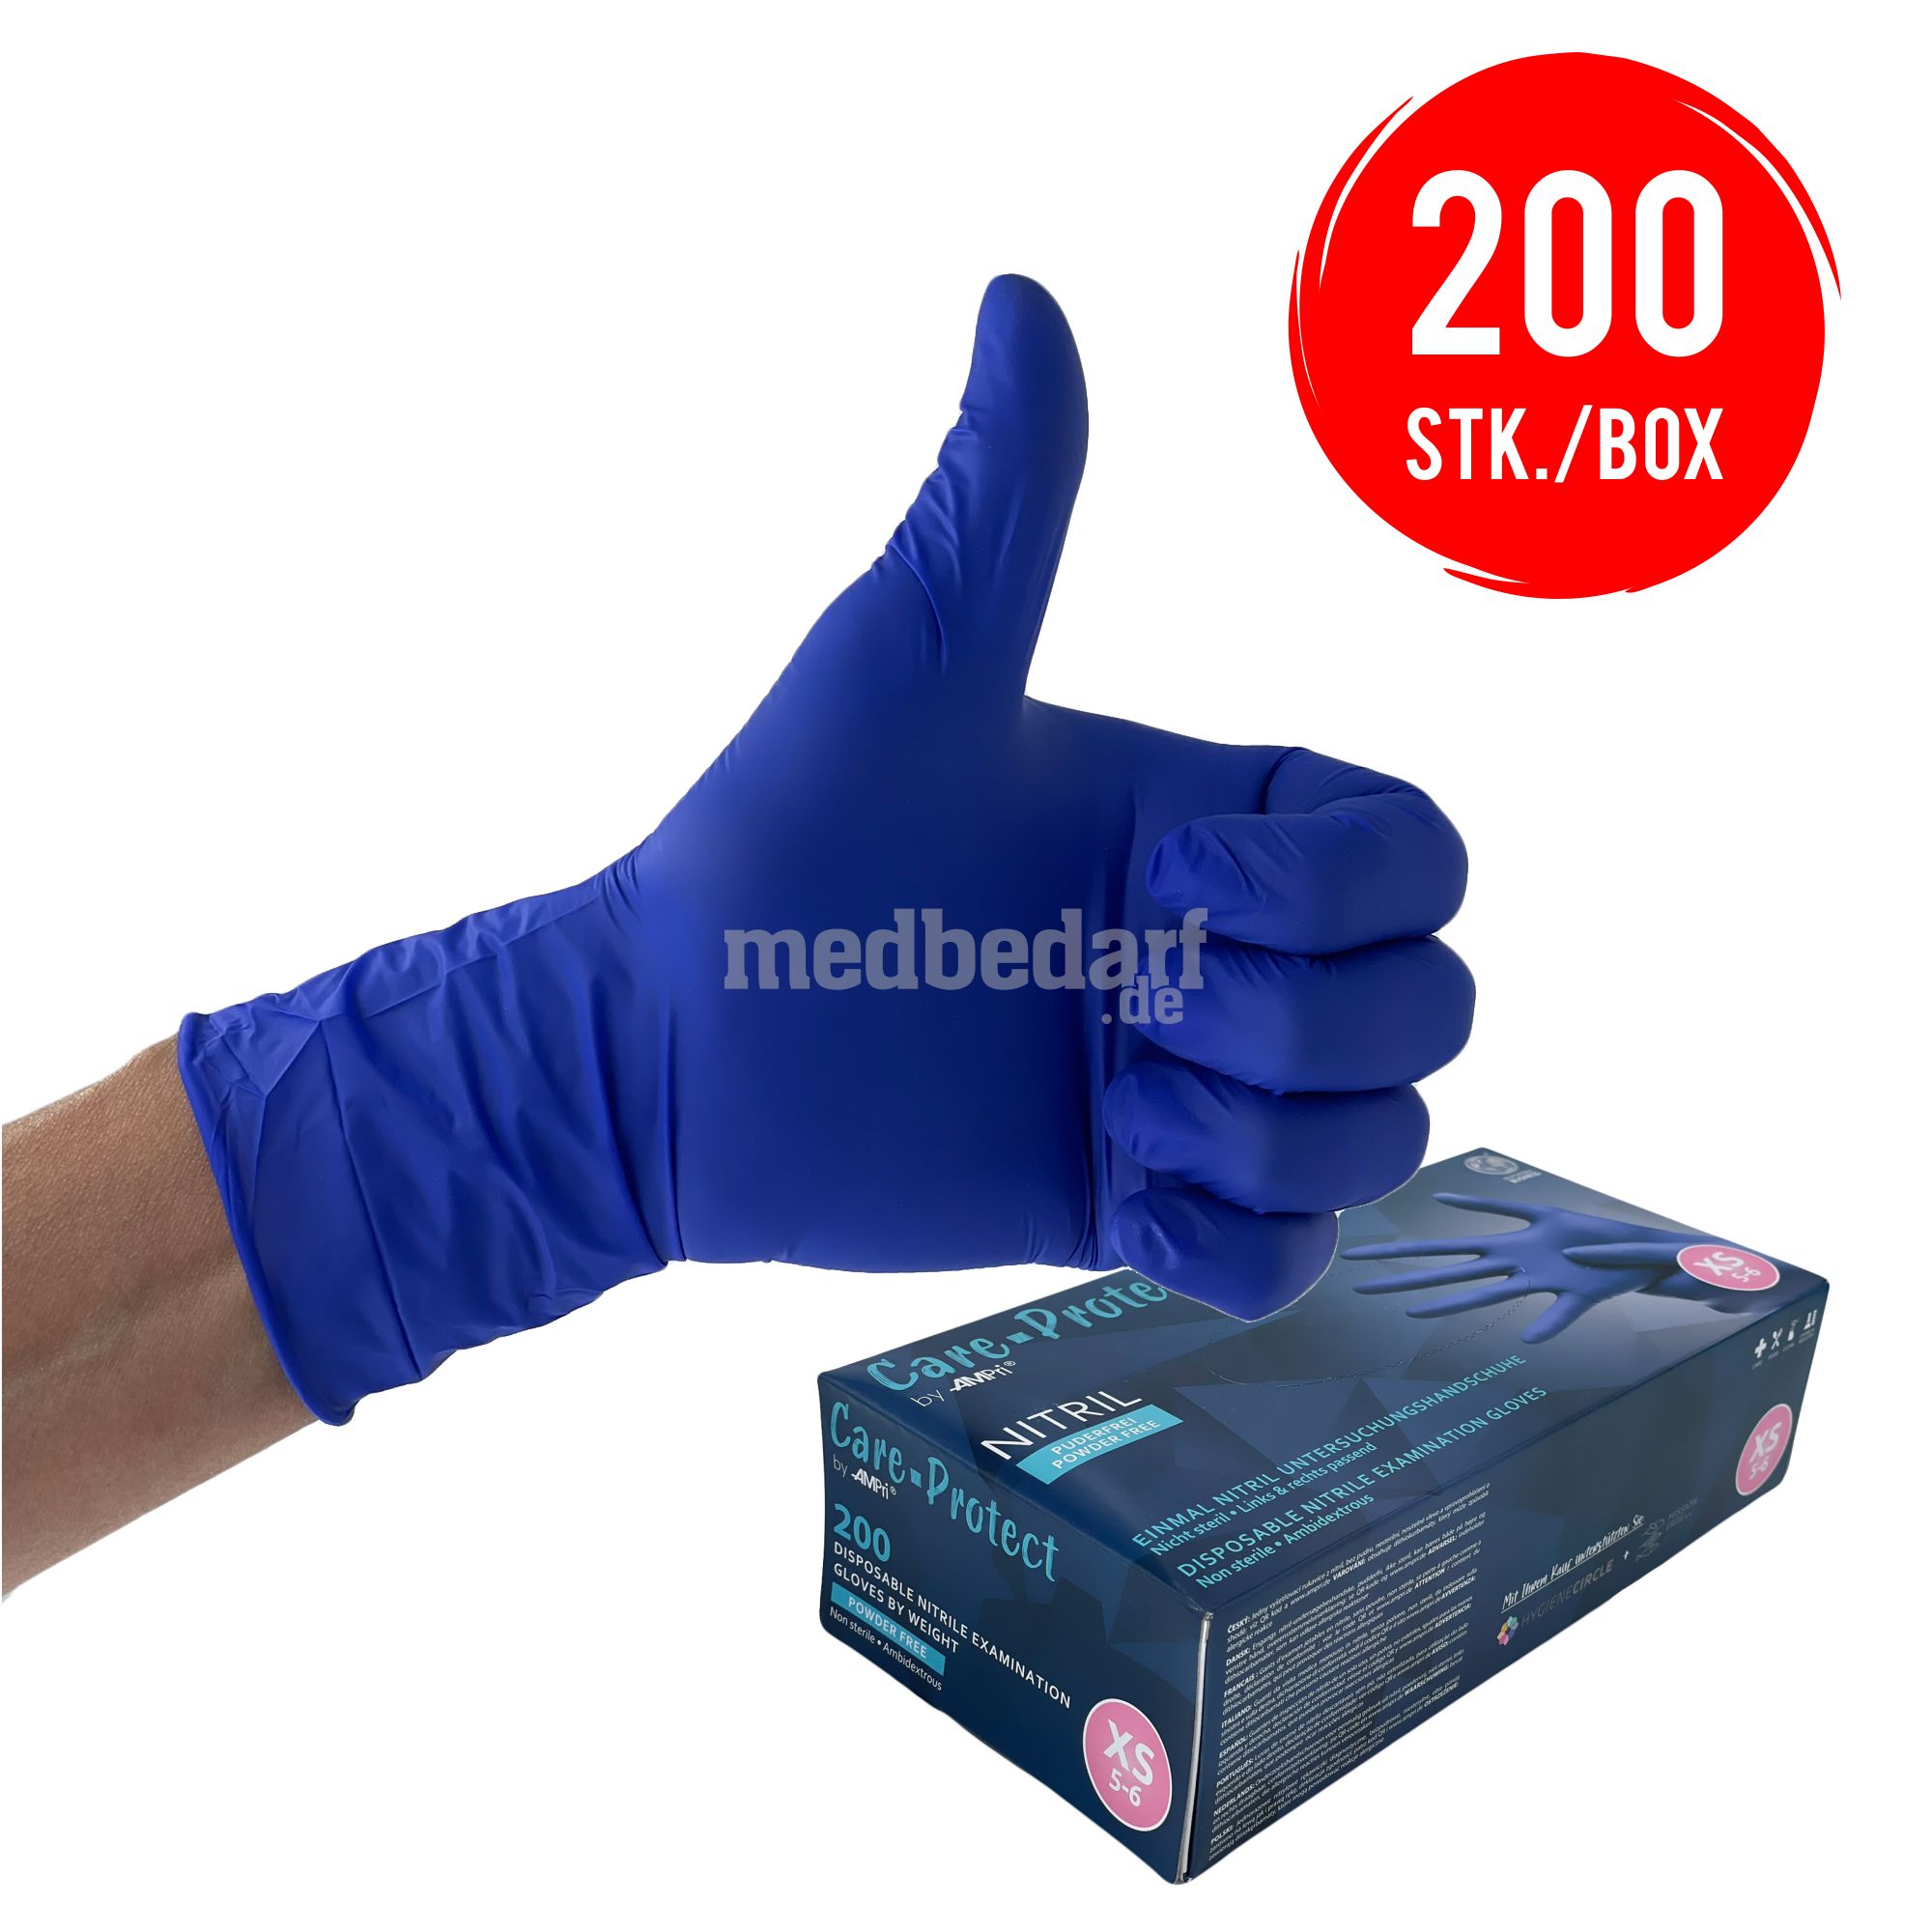 Nitril-Handschuh, Care-Protect, 200 Stück, puderfrei